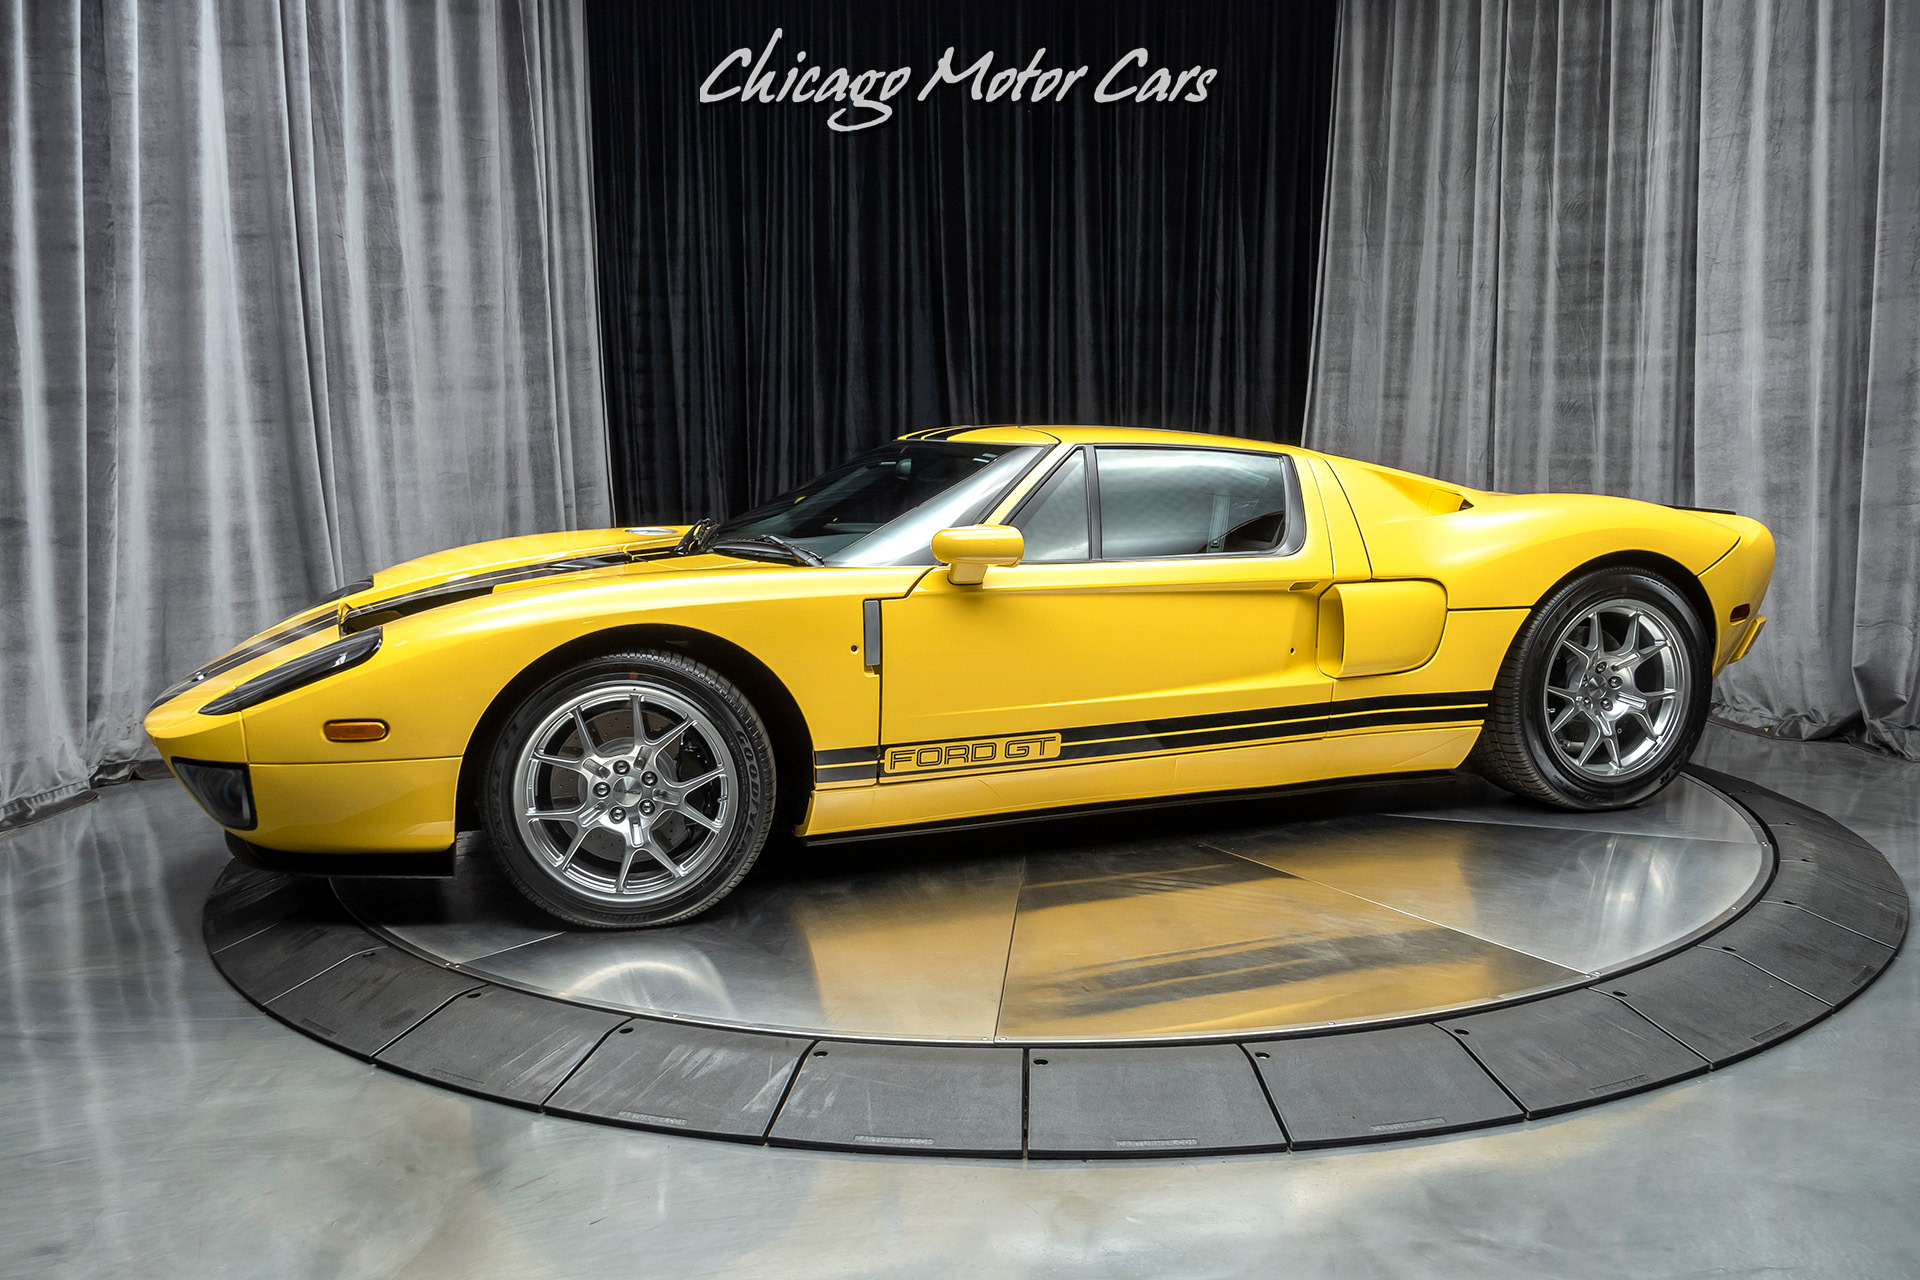 Used 2006 Ford GT Only 523 Miles All 4 Options Collection Quality 